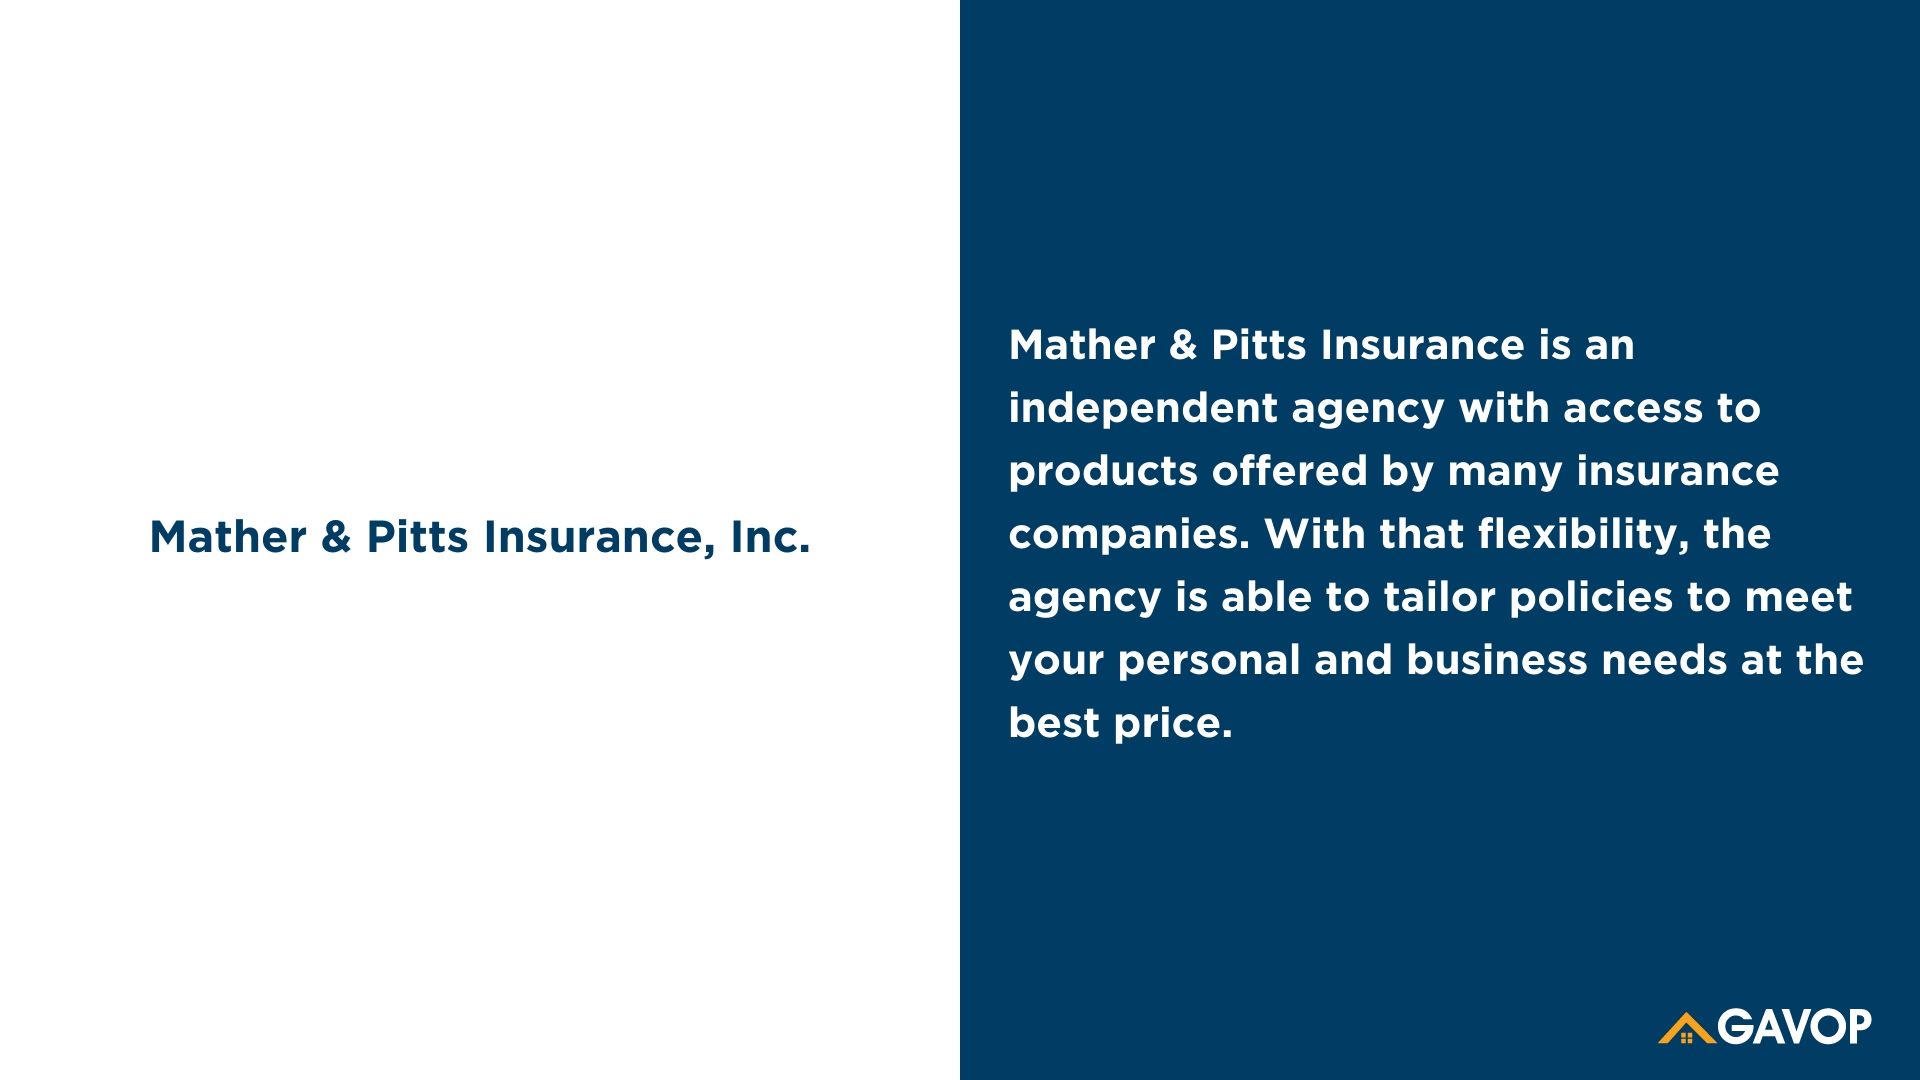 Mather & Pitts Insurance, Inc.